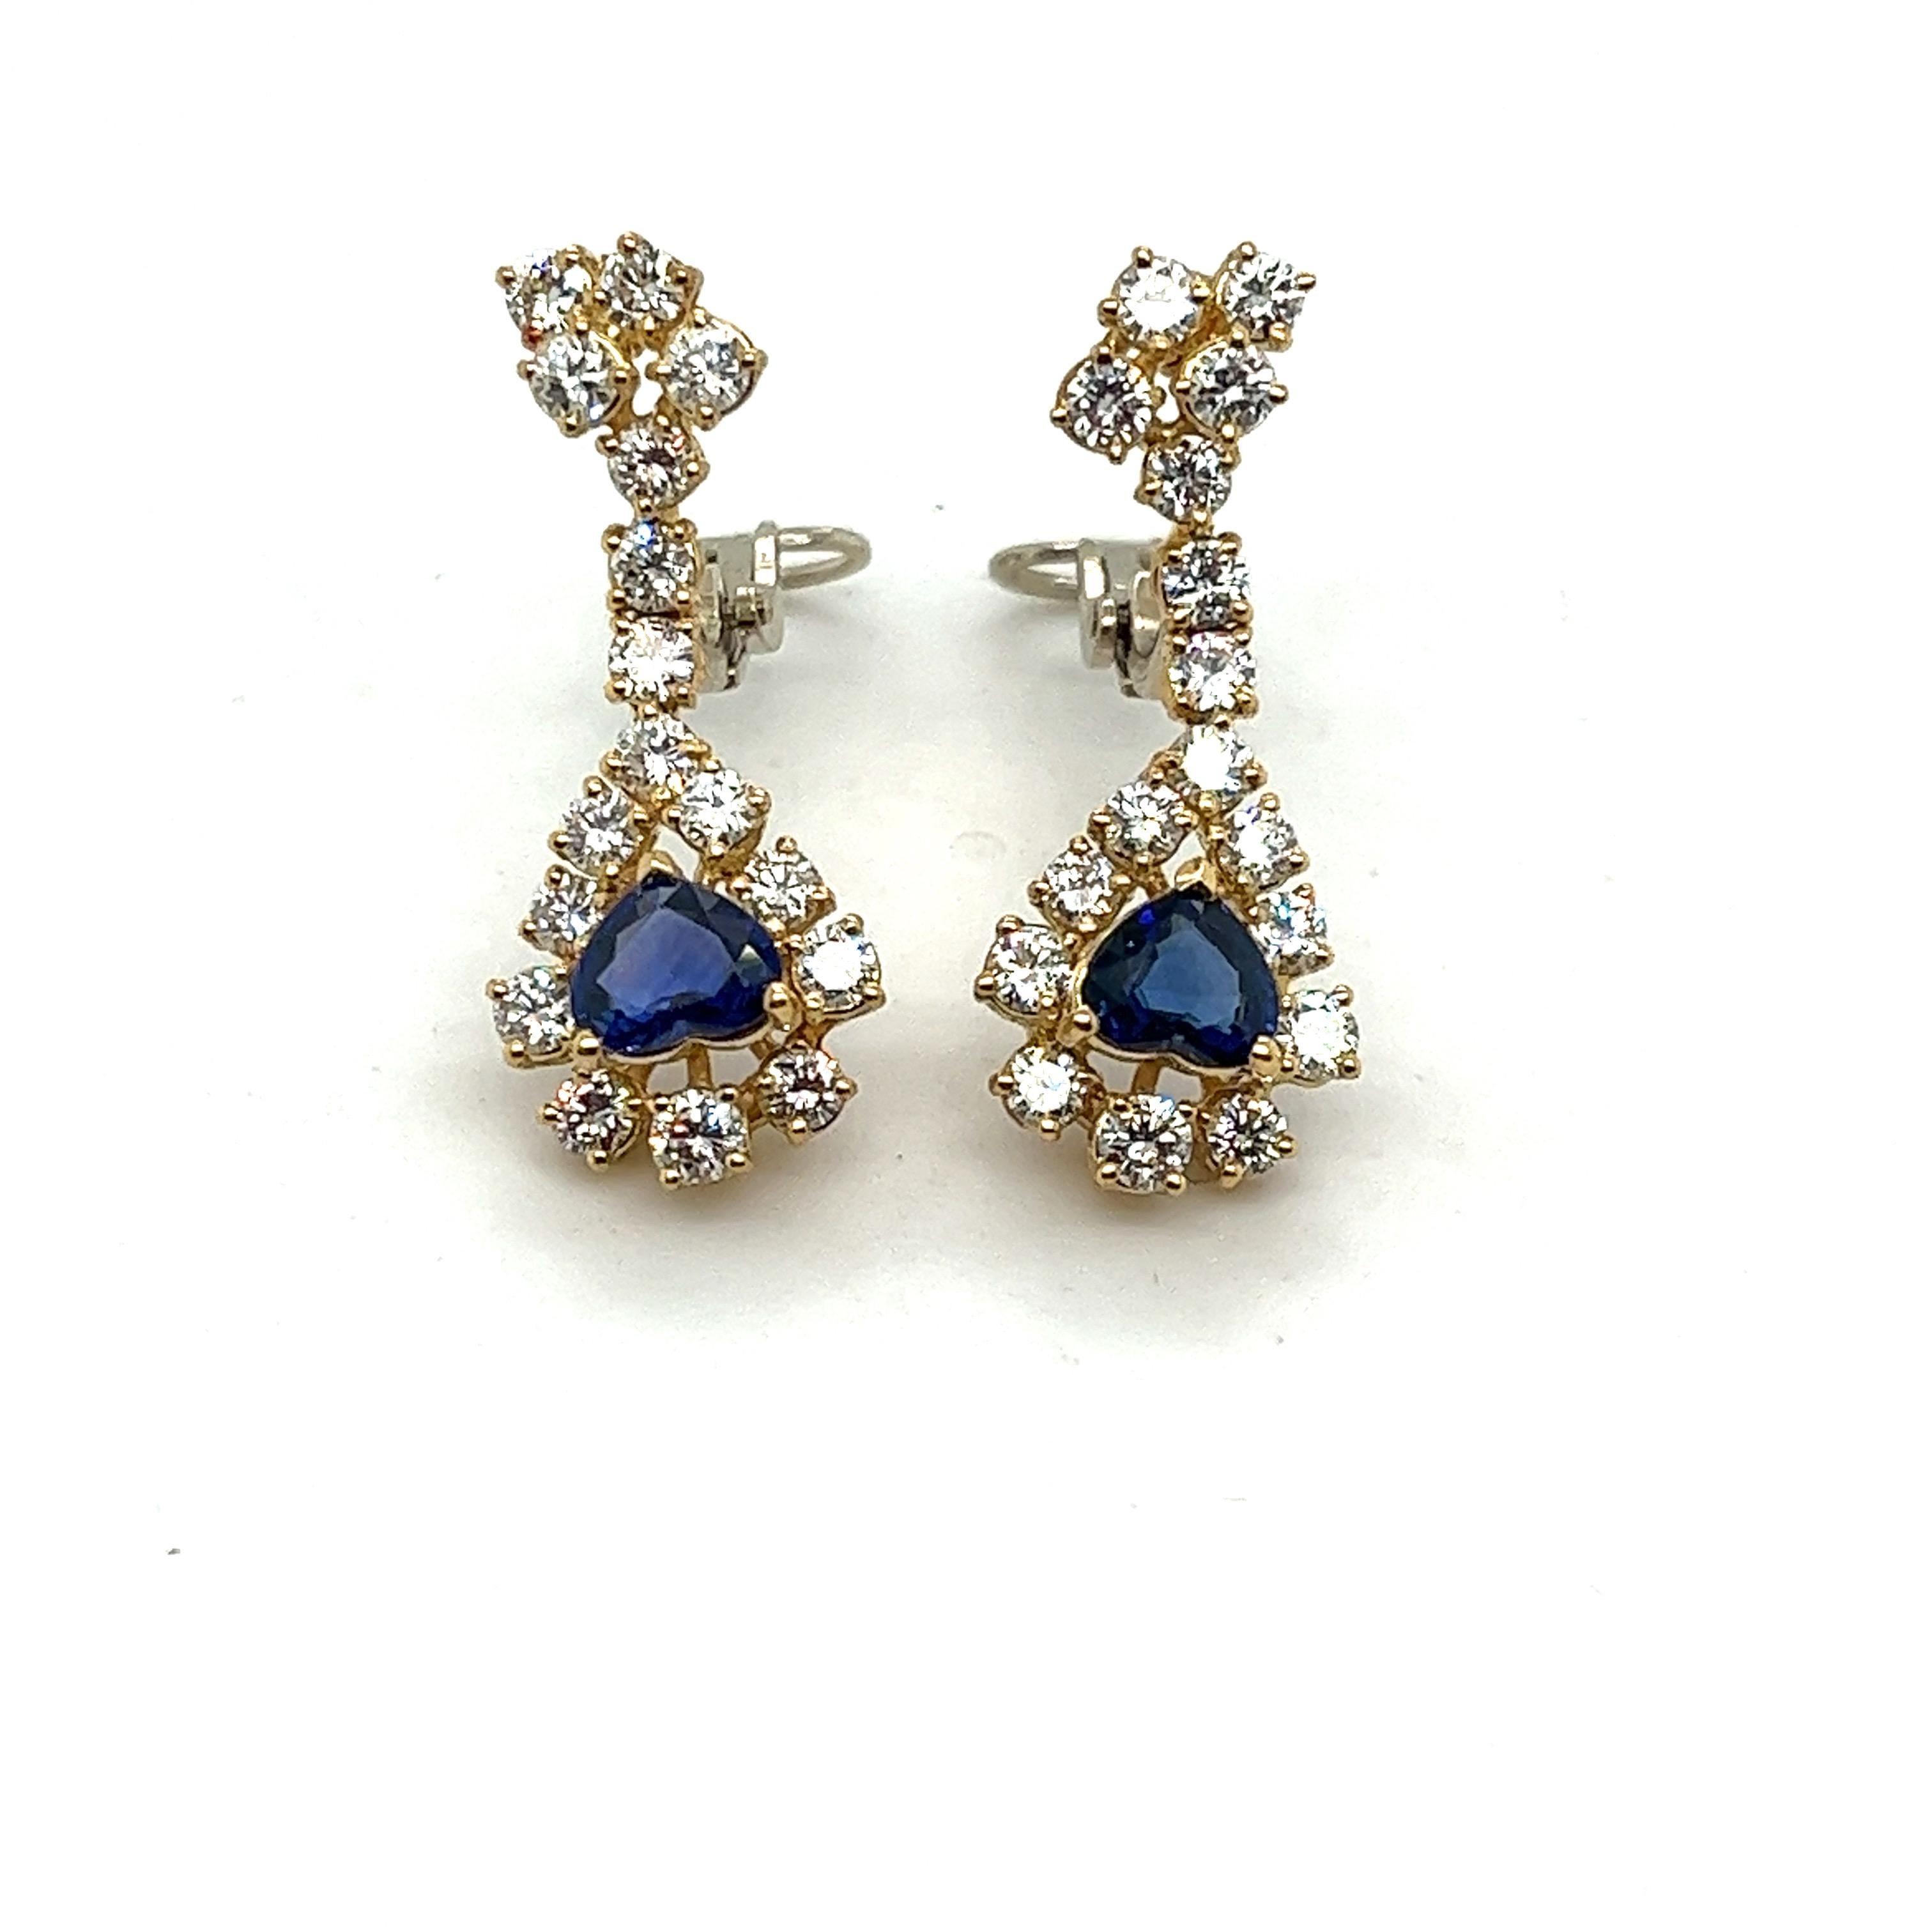 Exquisite 18 Karat Yellow Gold Sapphire and Diamond Dangle Earrings

Elevate your elegance with these luxurious 18 karat yellow gold dangle earrings, a harmonious fusion of exceptional gemstones and exquisite craftsmanship. The focal point of each